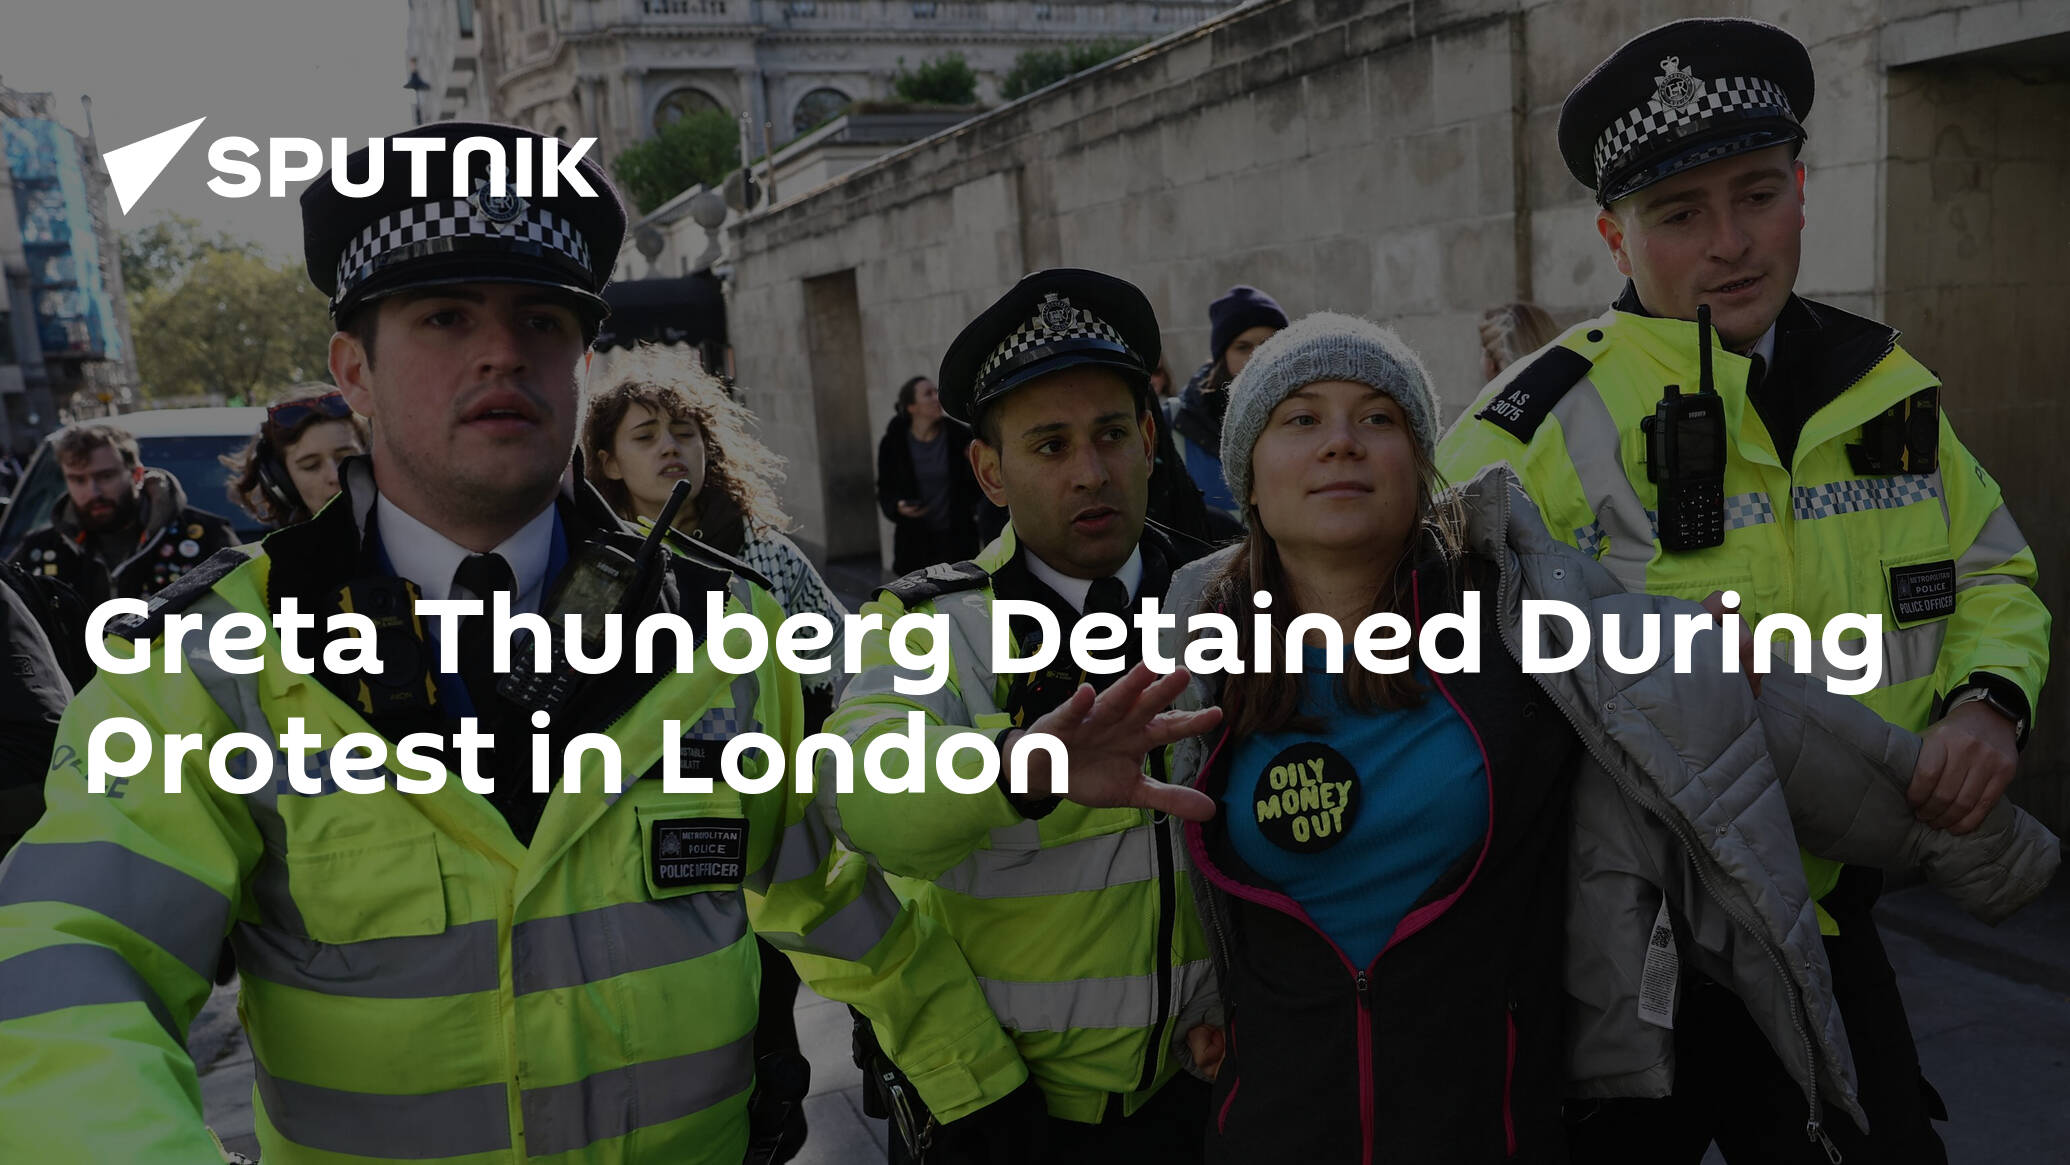 Greta Thunberg Detained During Protest in London